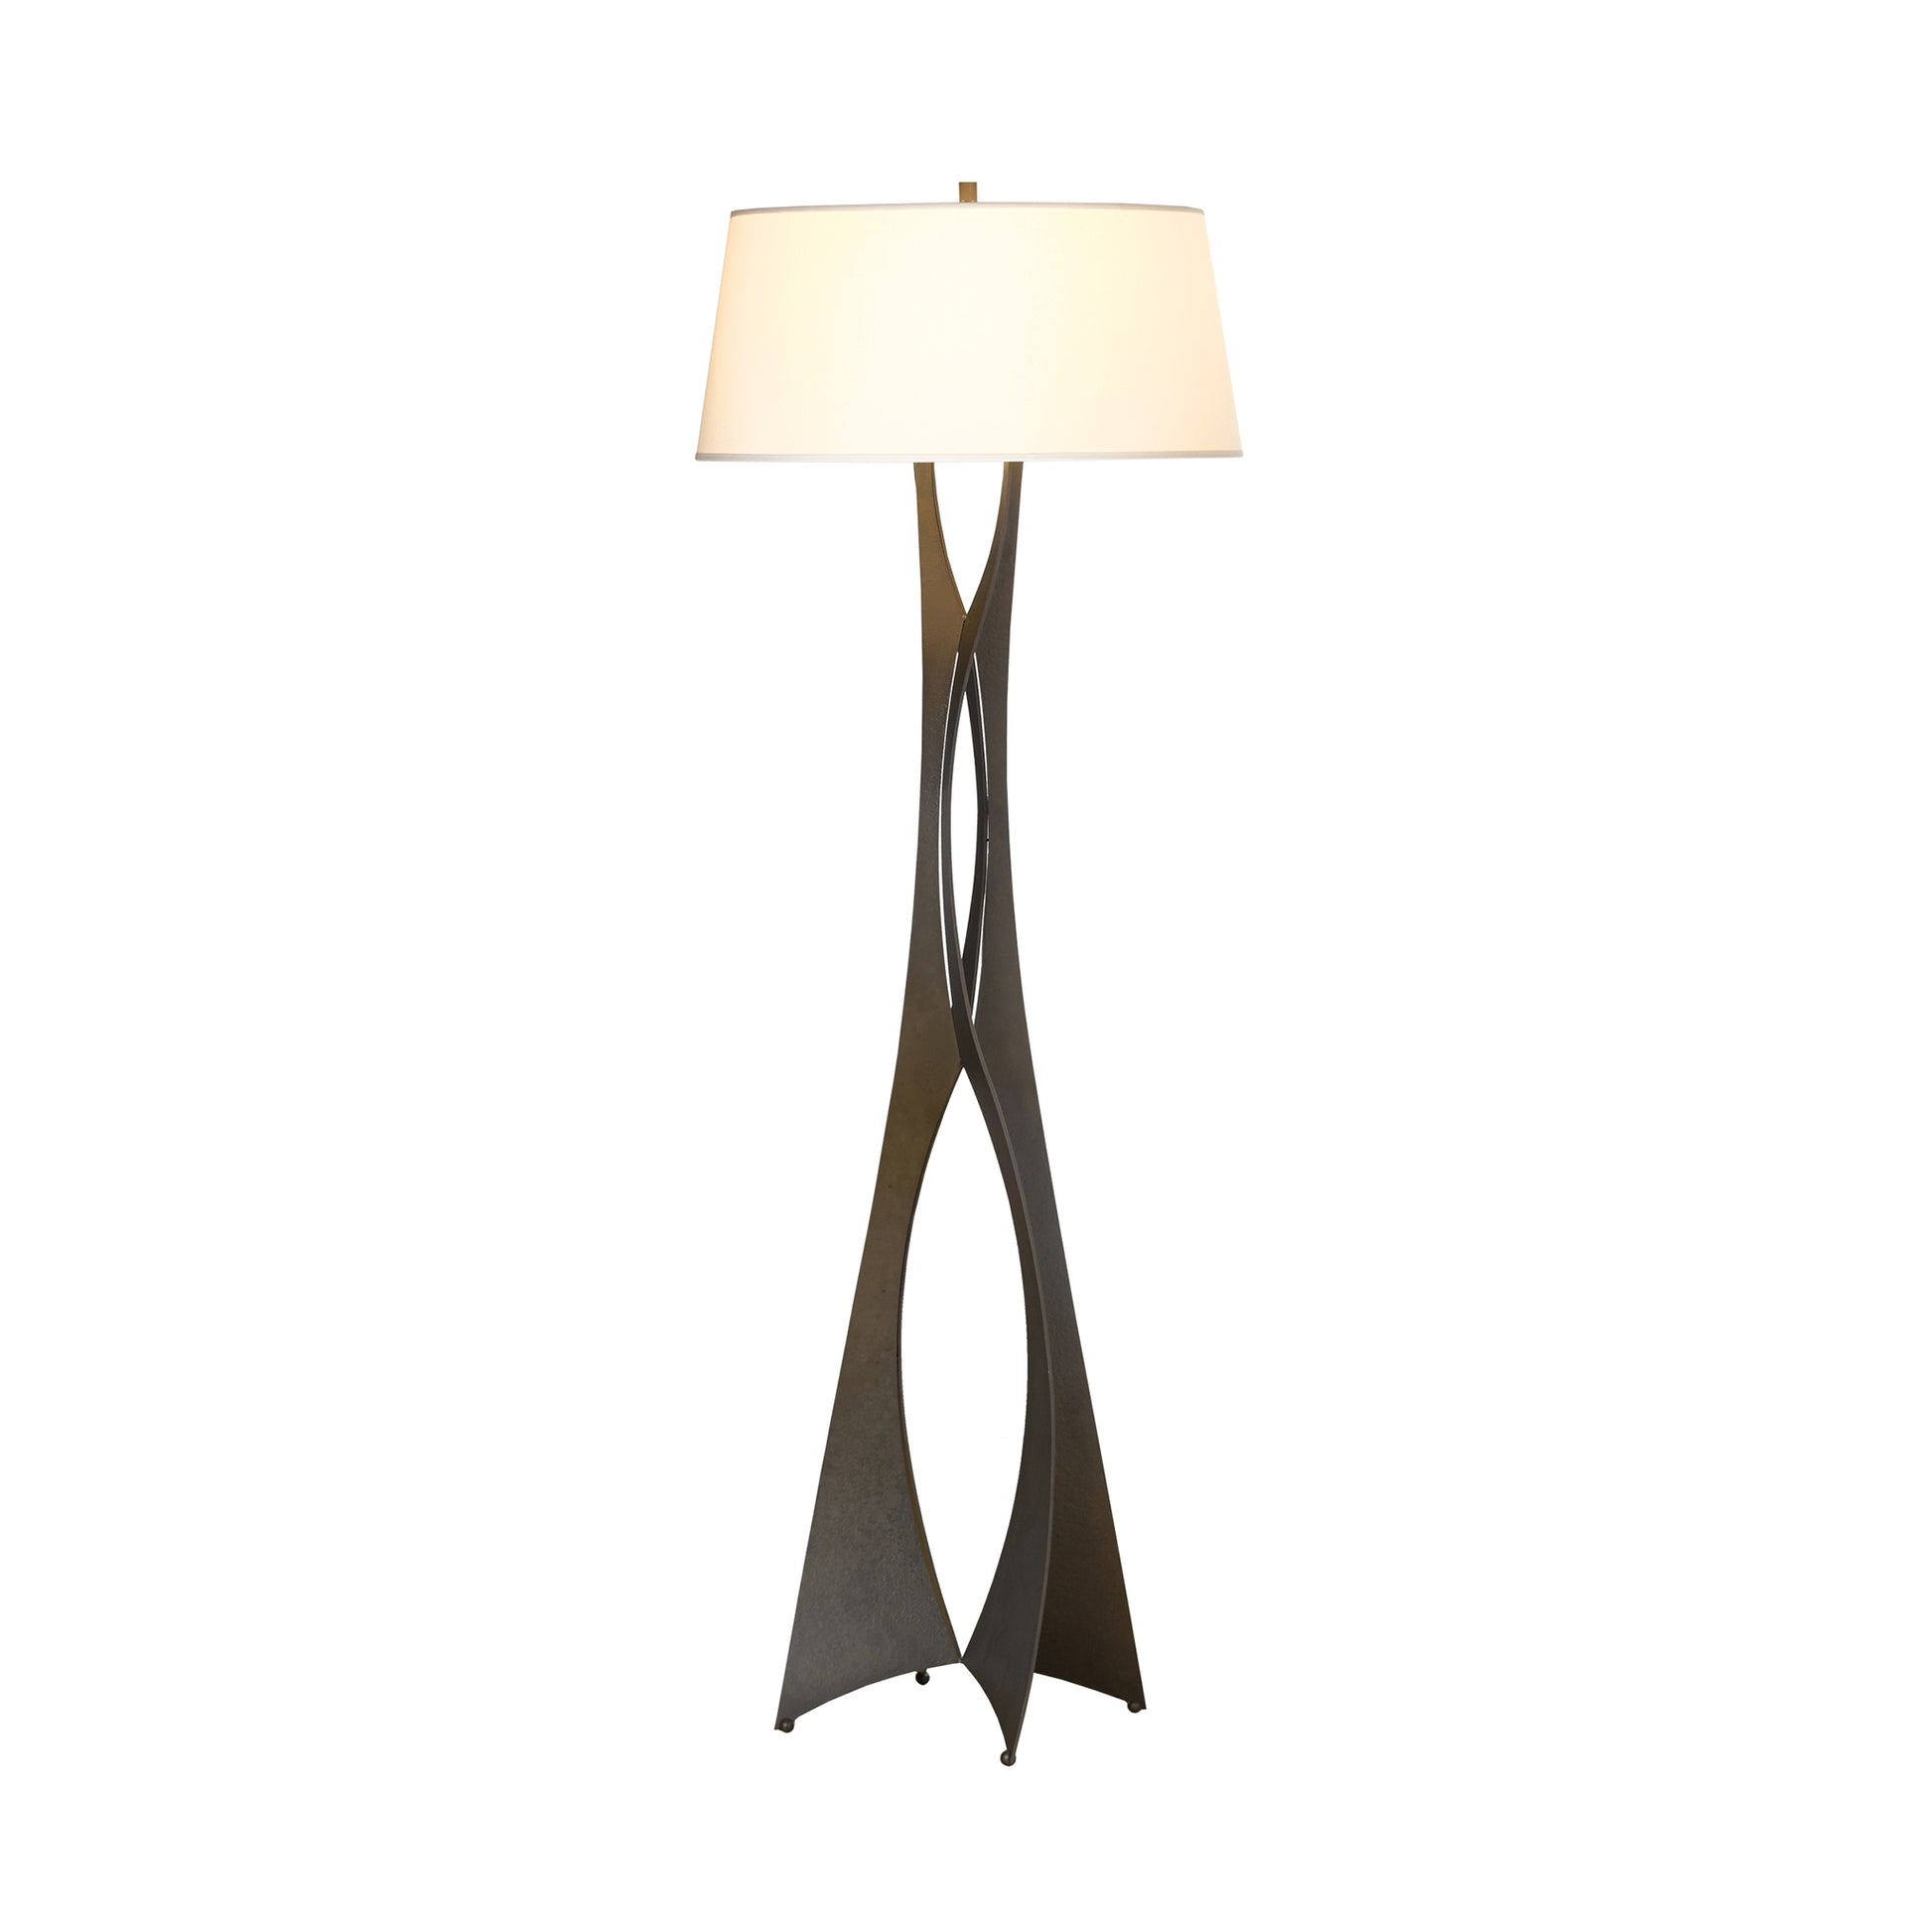 A Moreau Floor Lamp by Hubbardton Forge, with a metal base and a white shade, perfect for adding a contemporary touch to your space.